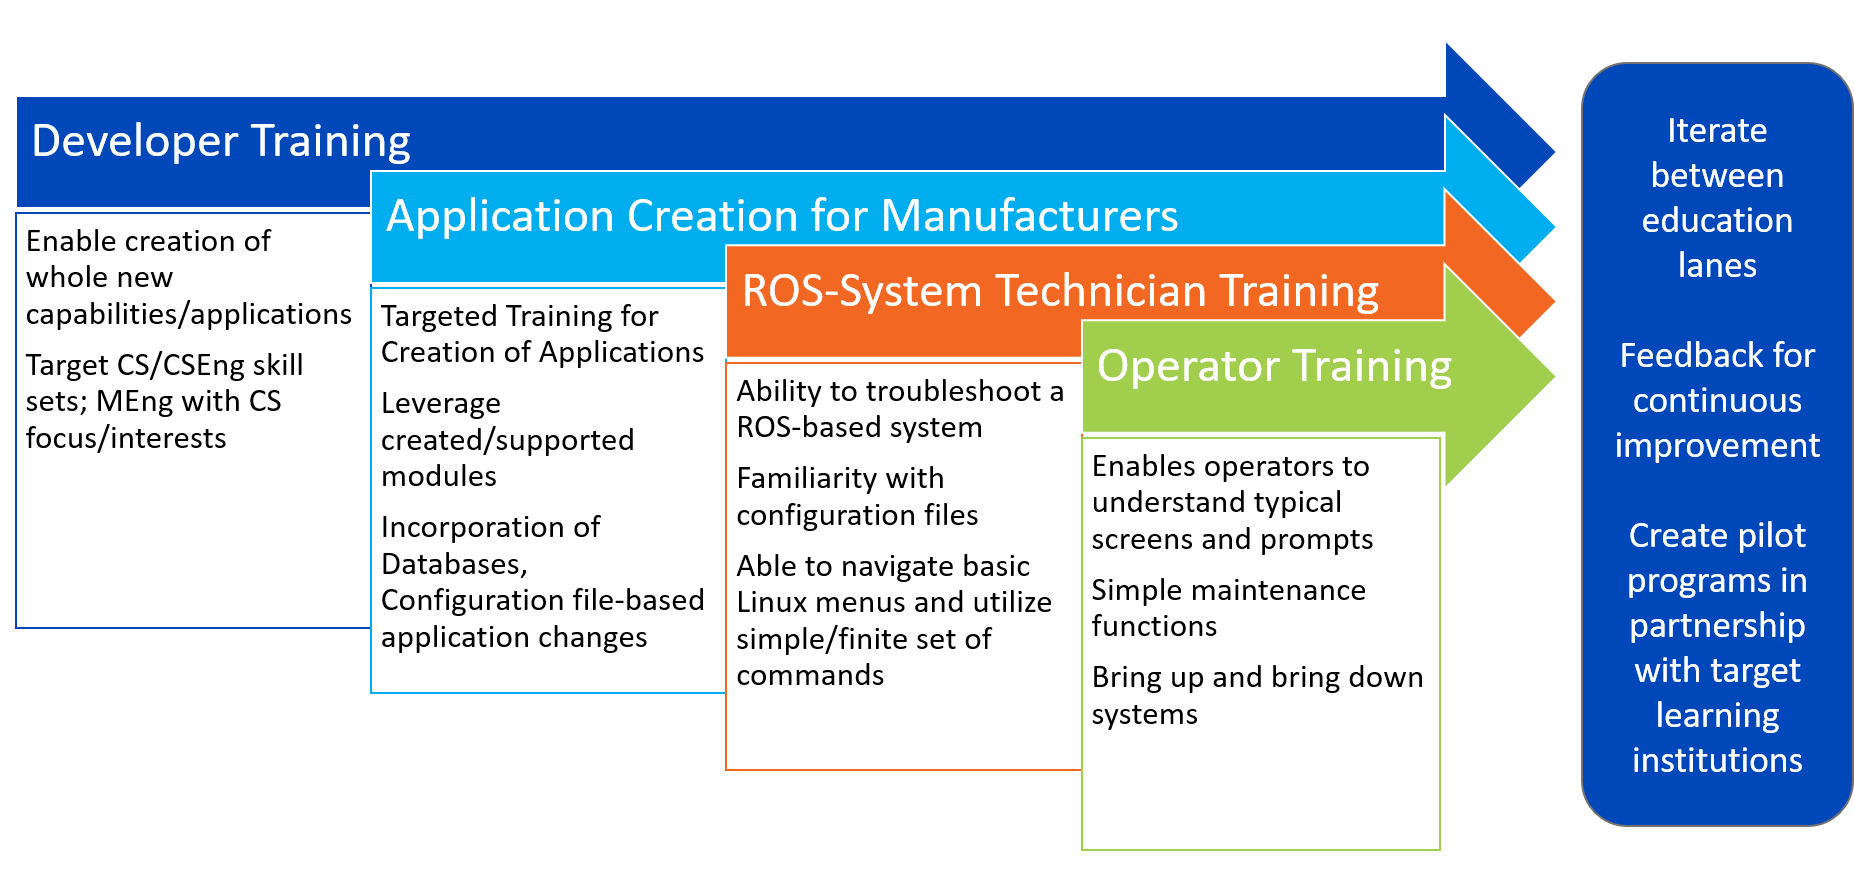 graphic showing the 4 tiers of robotics education - developer training, application creation for manufacturers, ros-system technician training, operator training